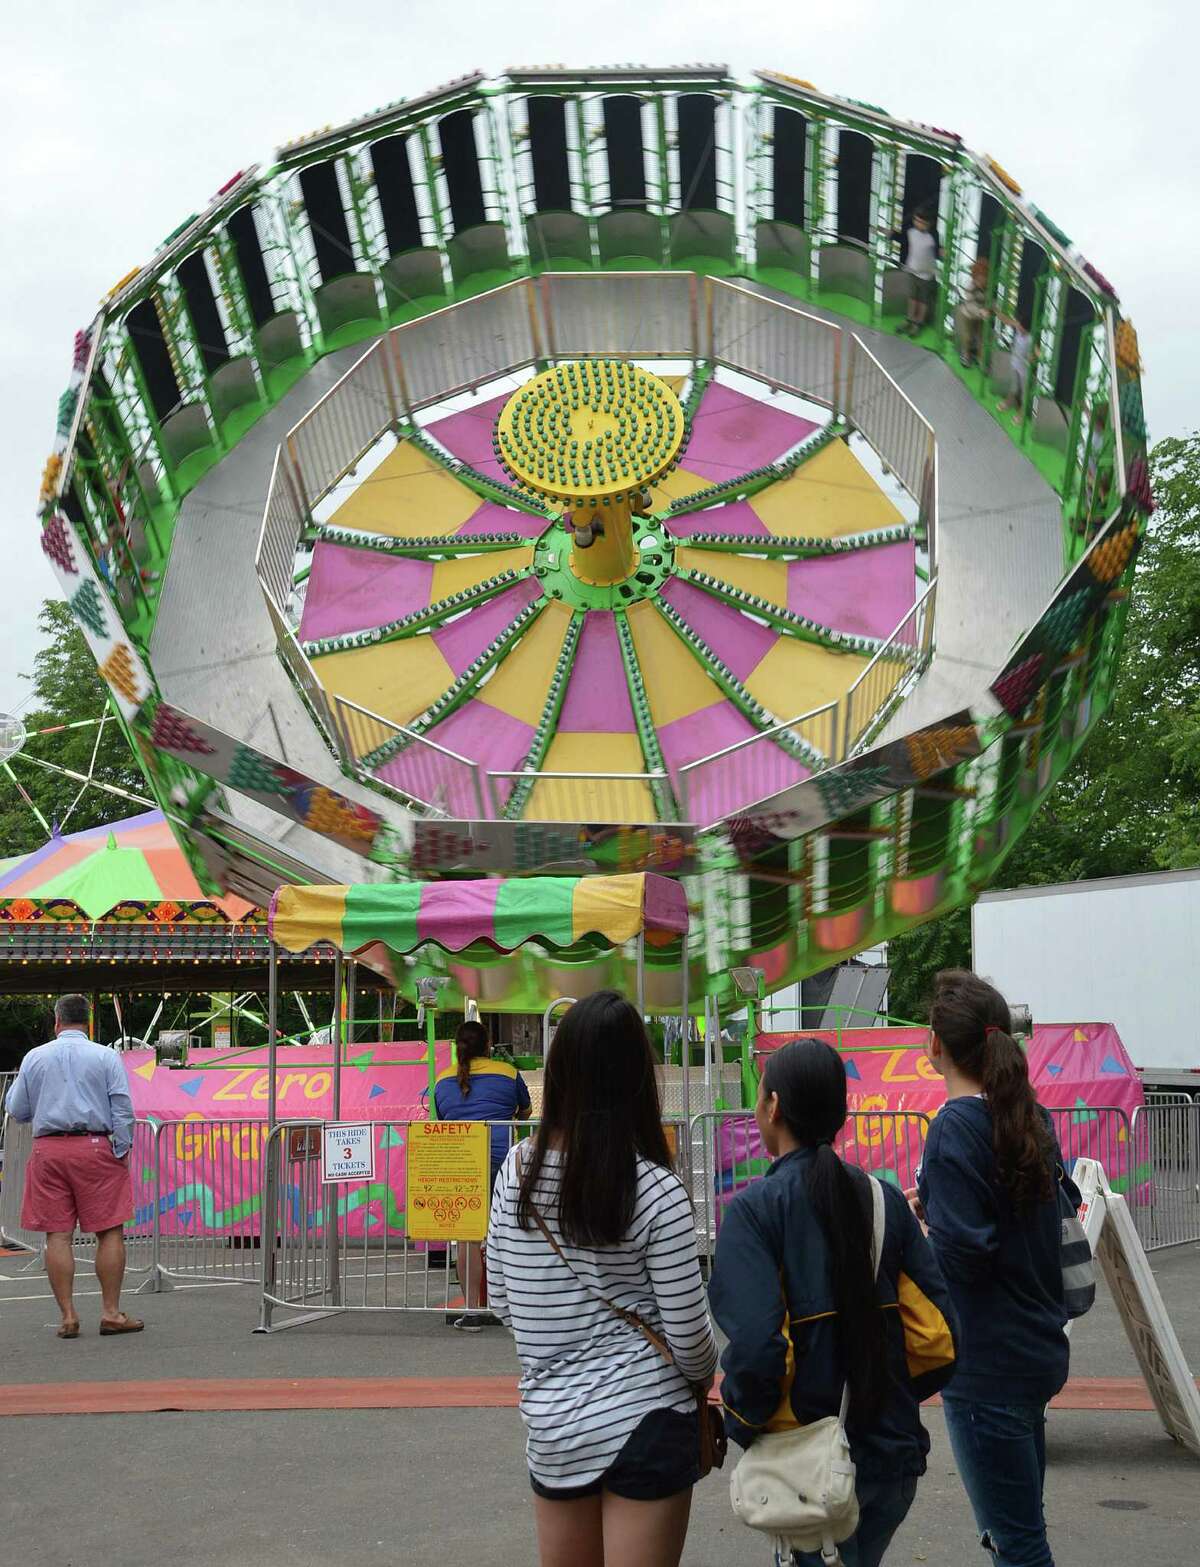 Take a shine to the Yankee Doodle Fair this weekend